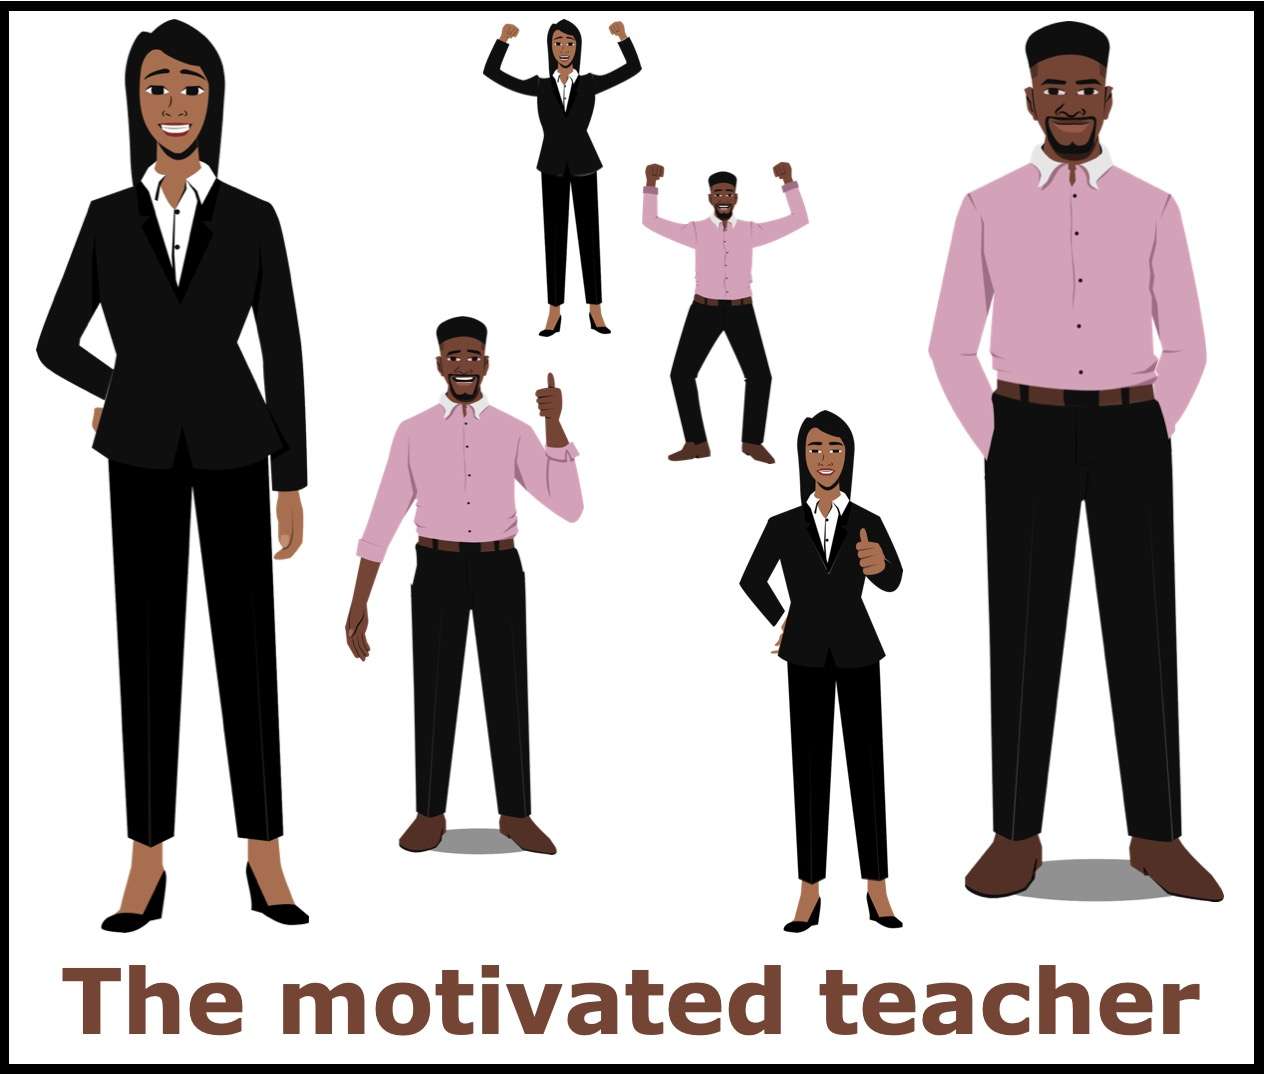 Tolu and Dayo the motivated teachers promote, smile